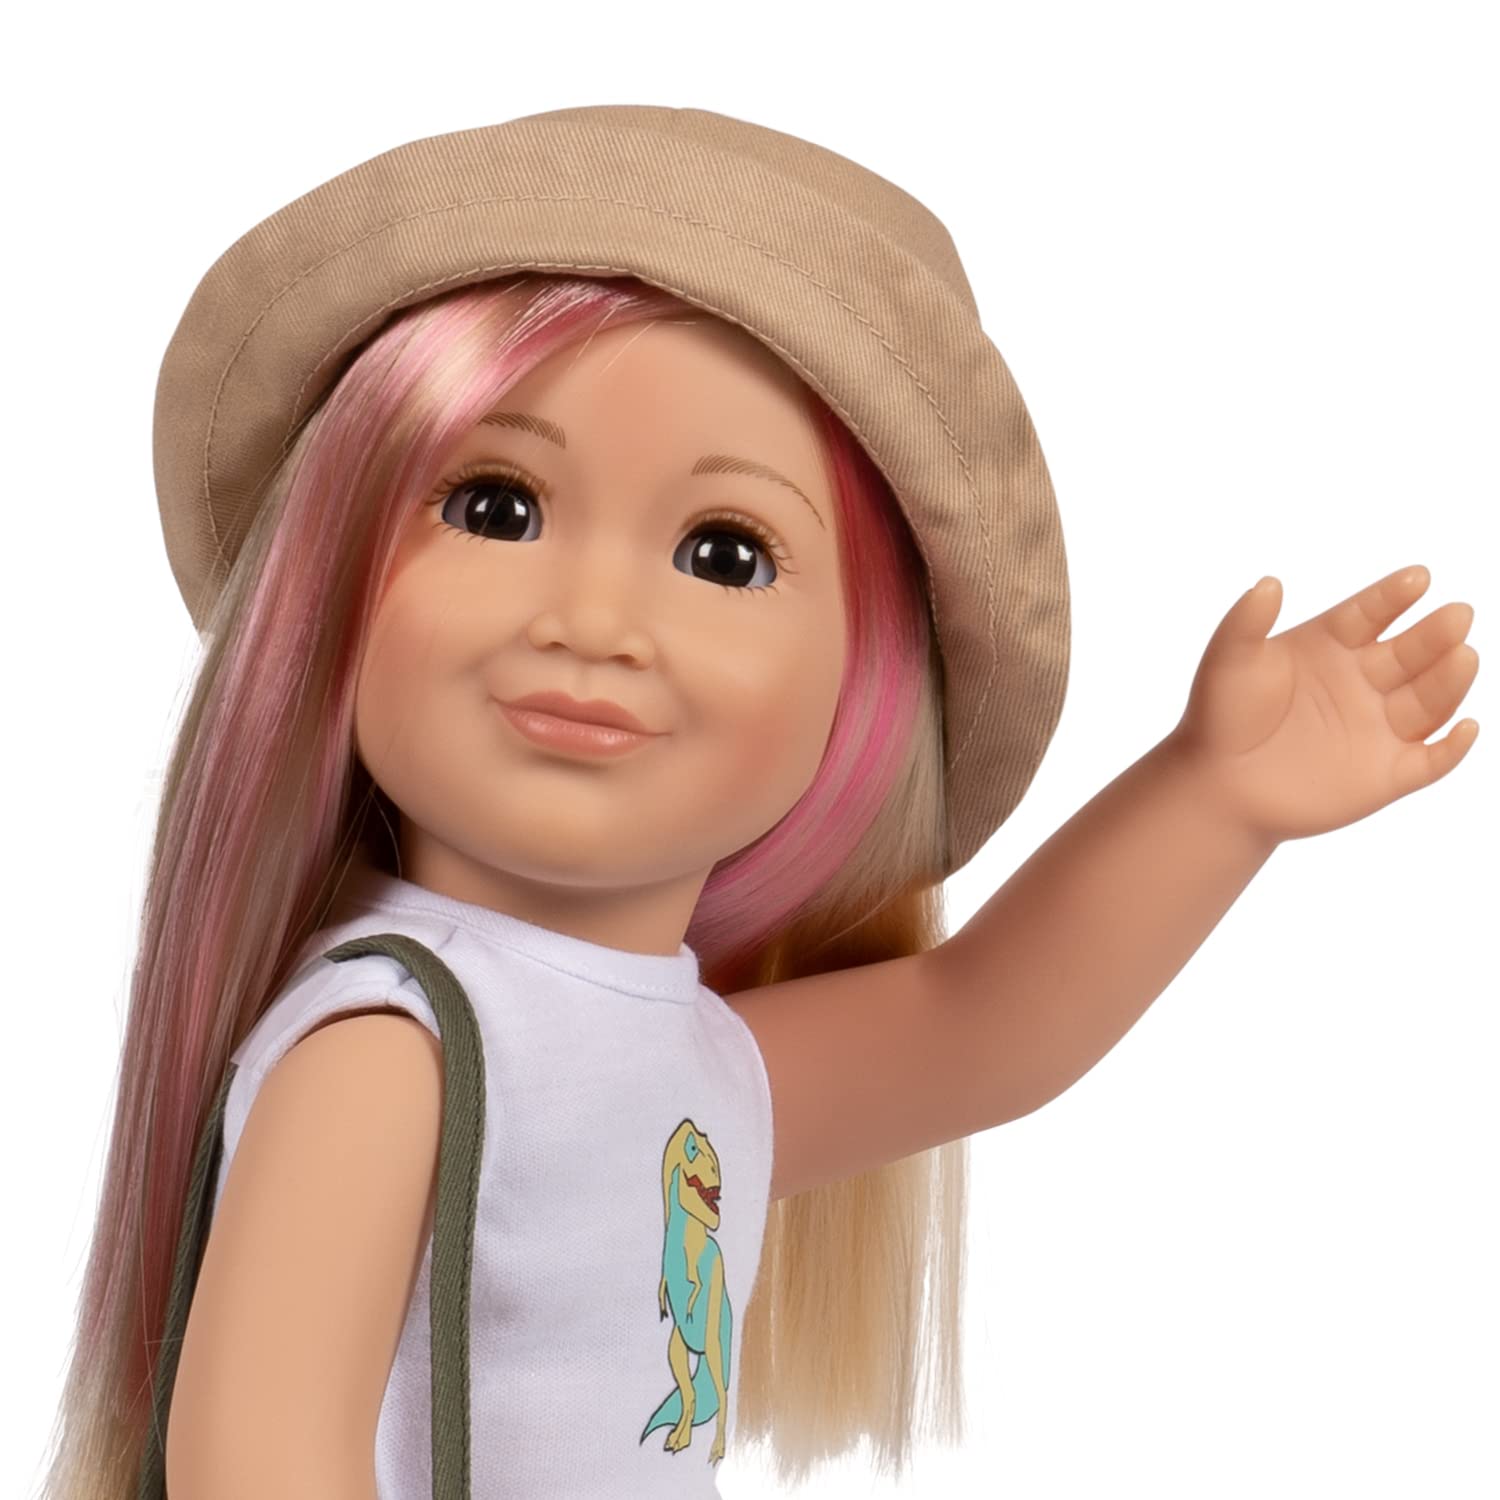 Adora Amazing Girls 18 Doll, Dino Lucy with Safari Outfit (Amazon Exclusive)